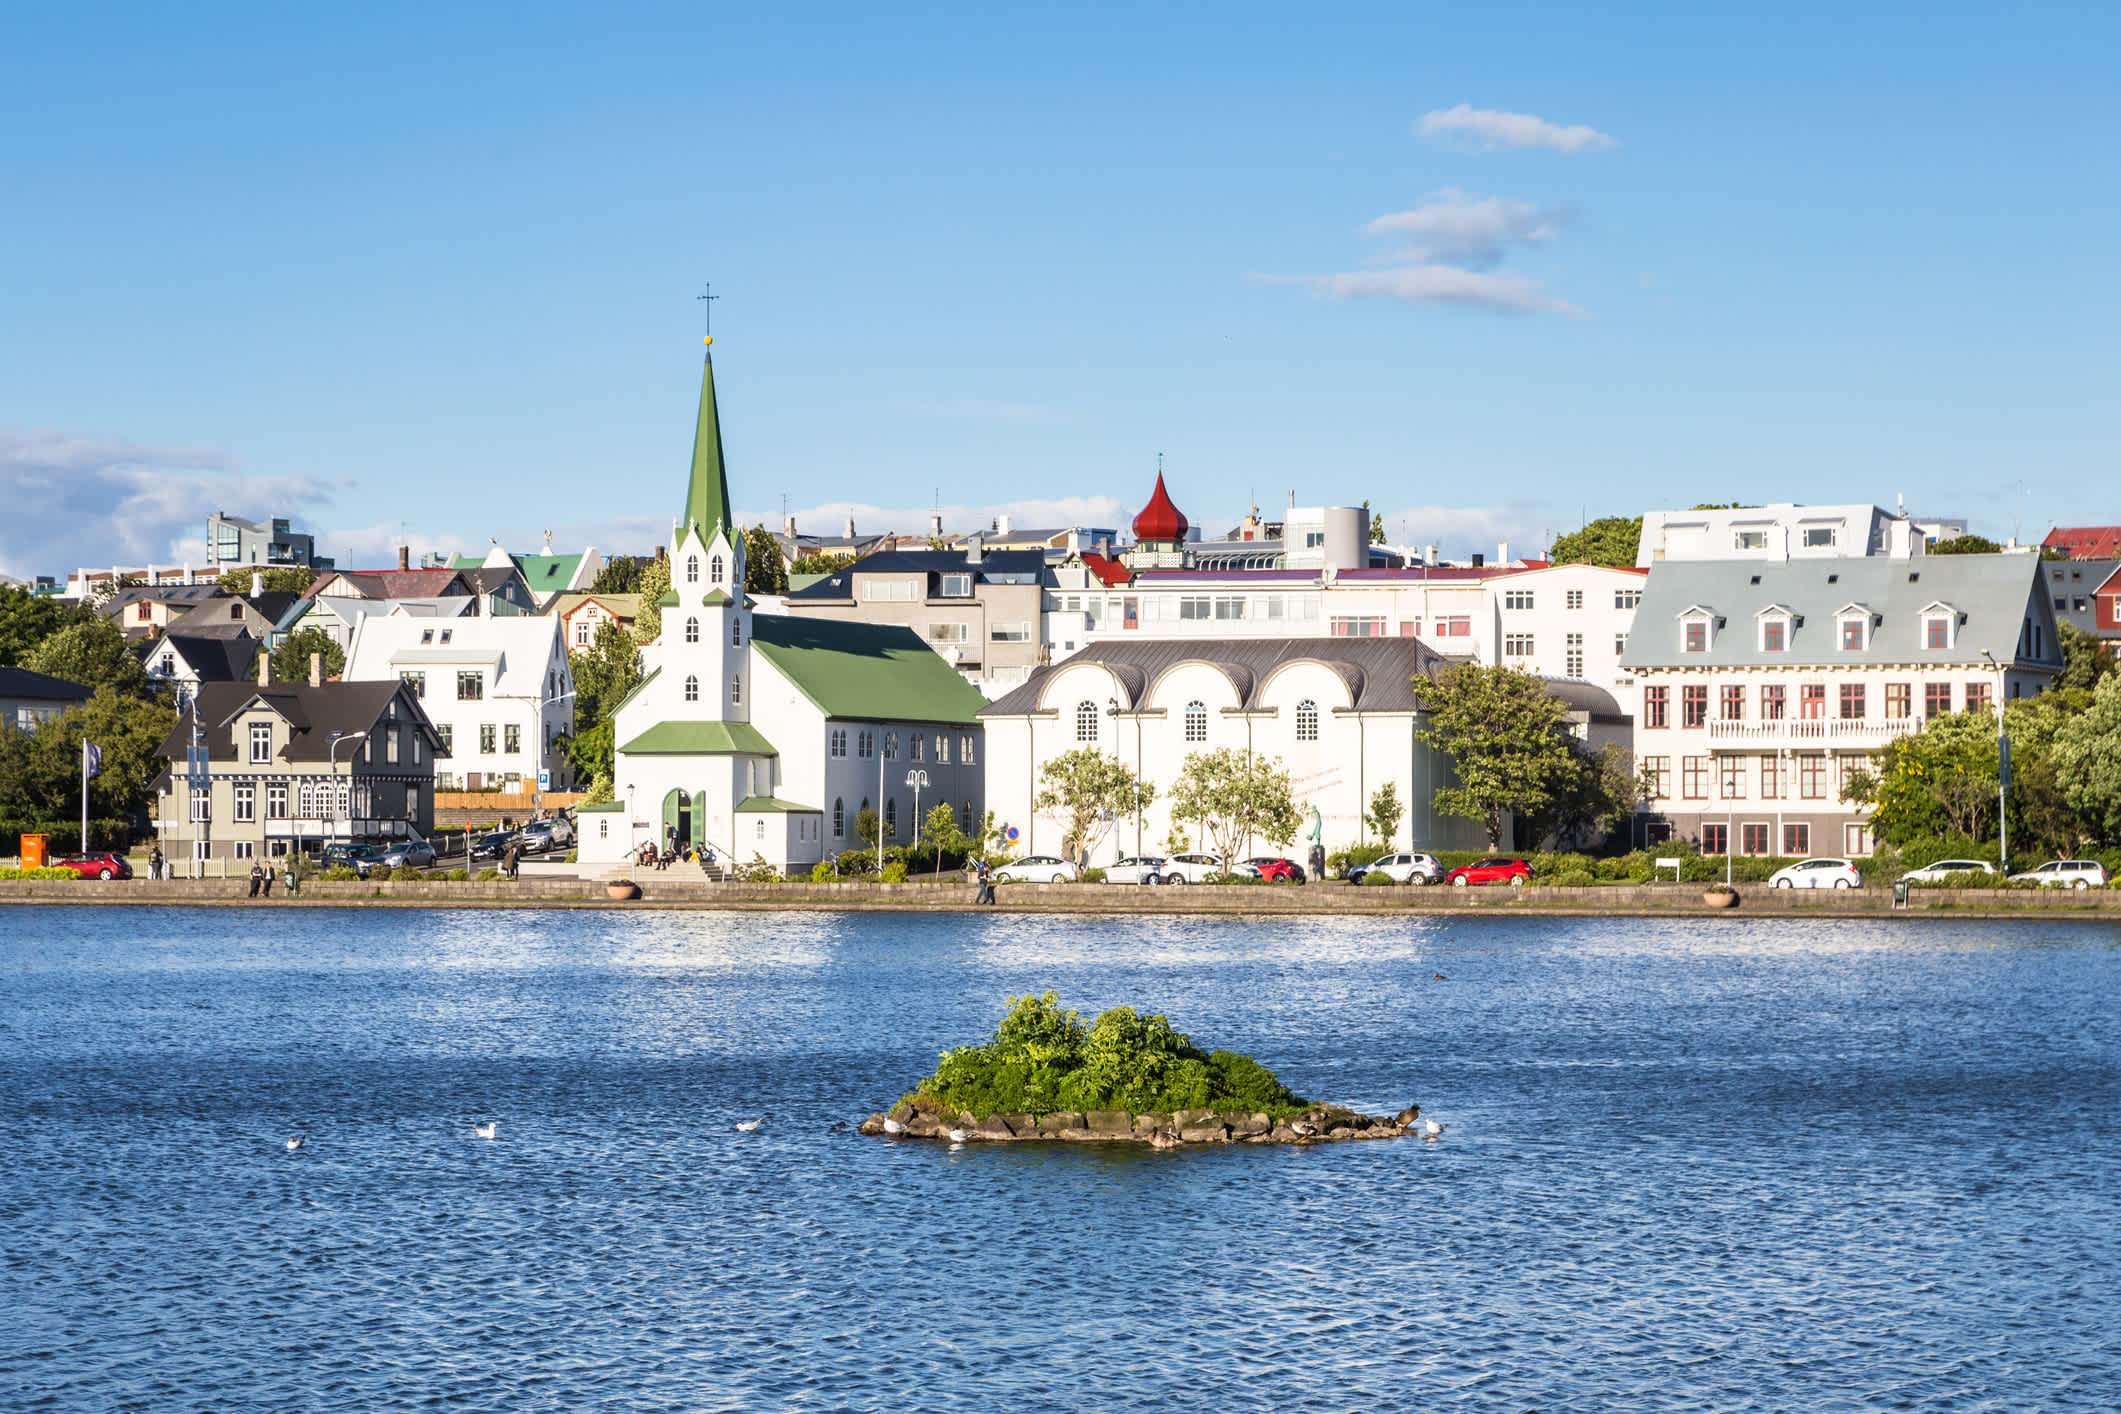 Reykjavík, the capital city of Iceland on a sunny summer day. Cityscape viewed from across the Tjornin lake.